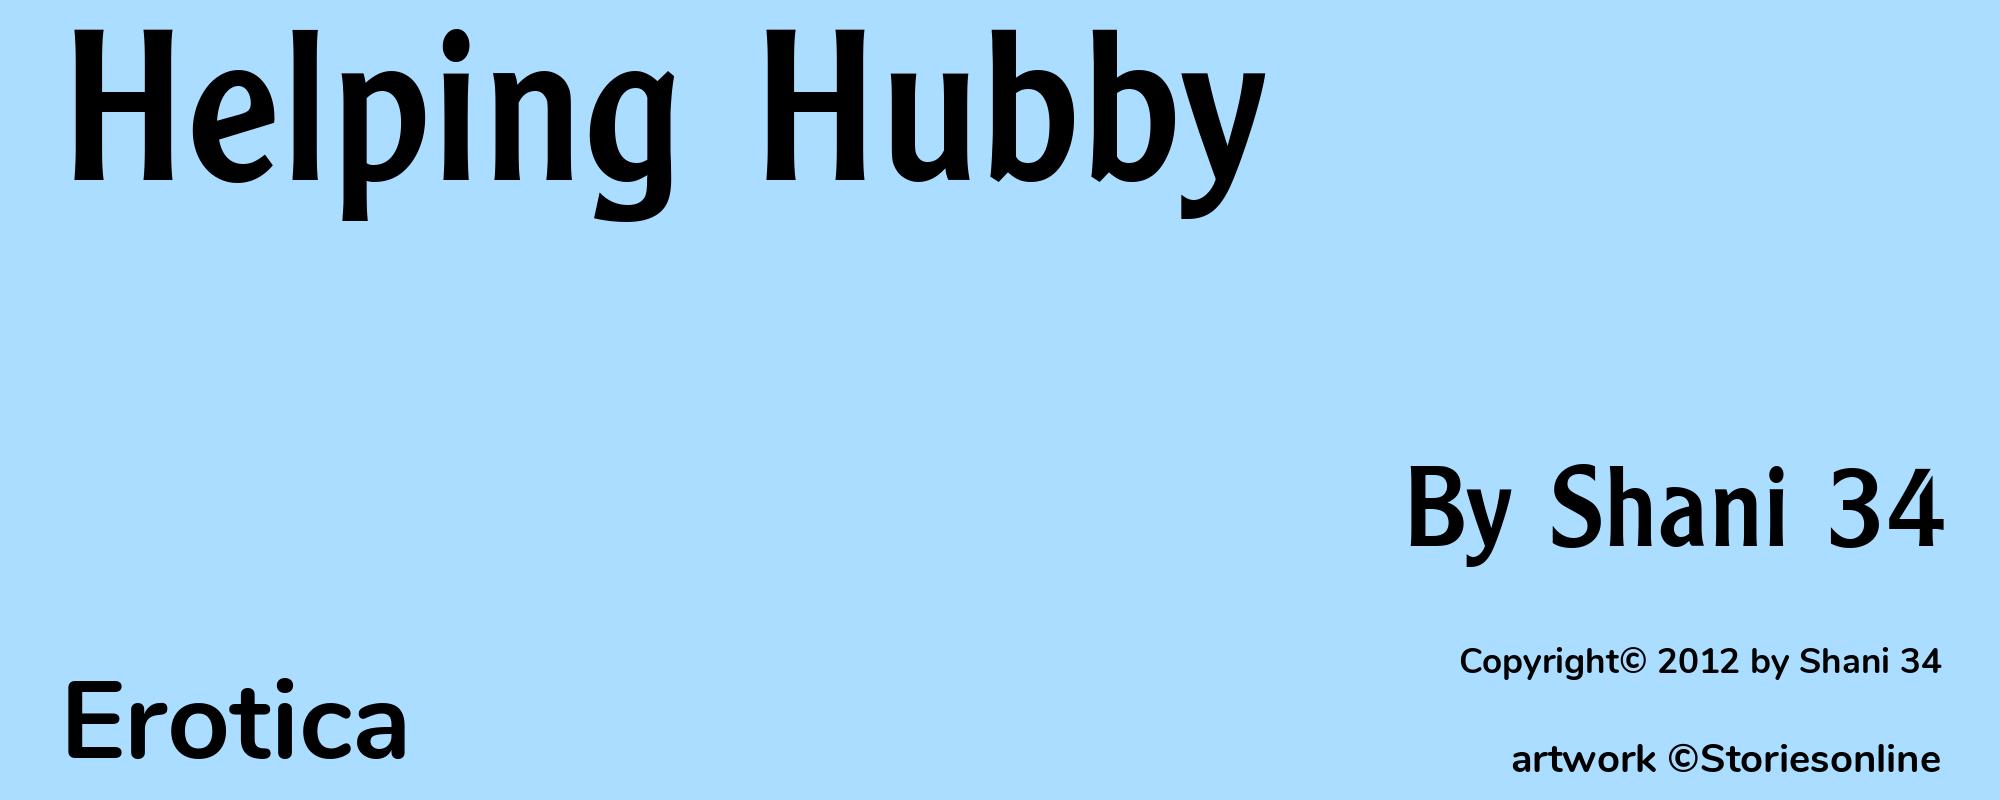 Helping Hubby - Cover